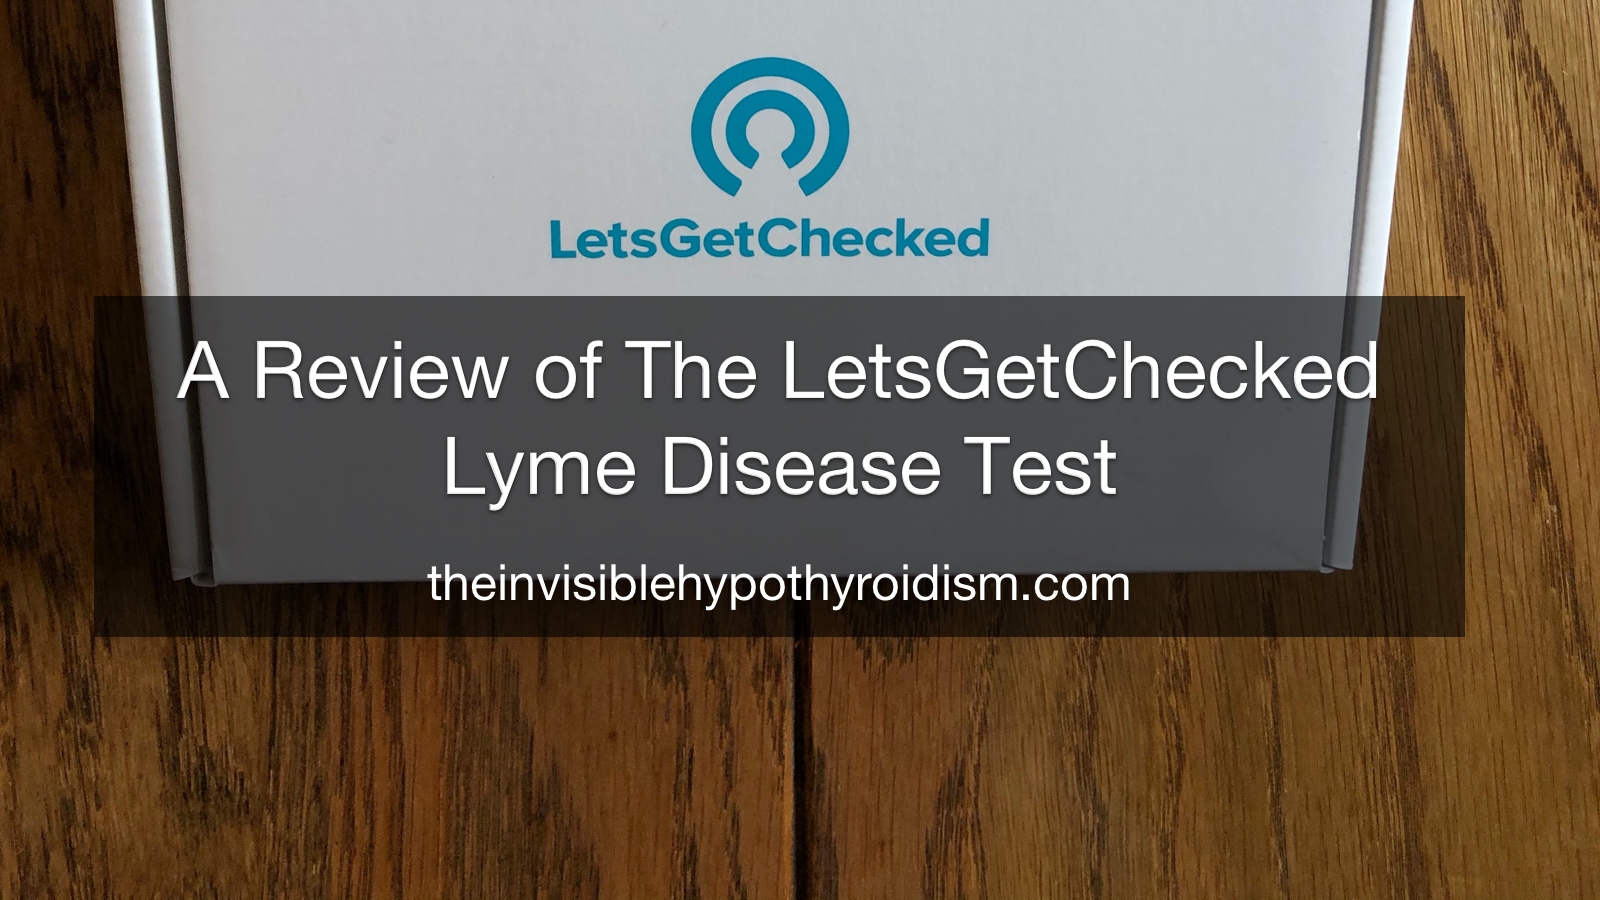 A Review of The LetsGetChecked Lyme Disease Test